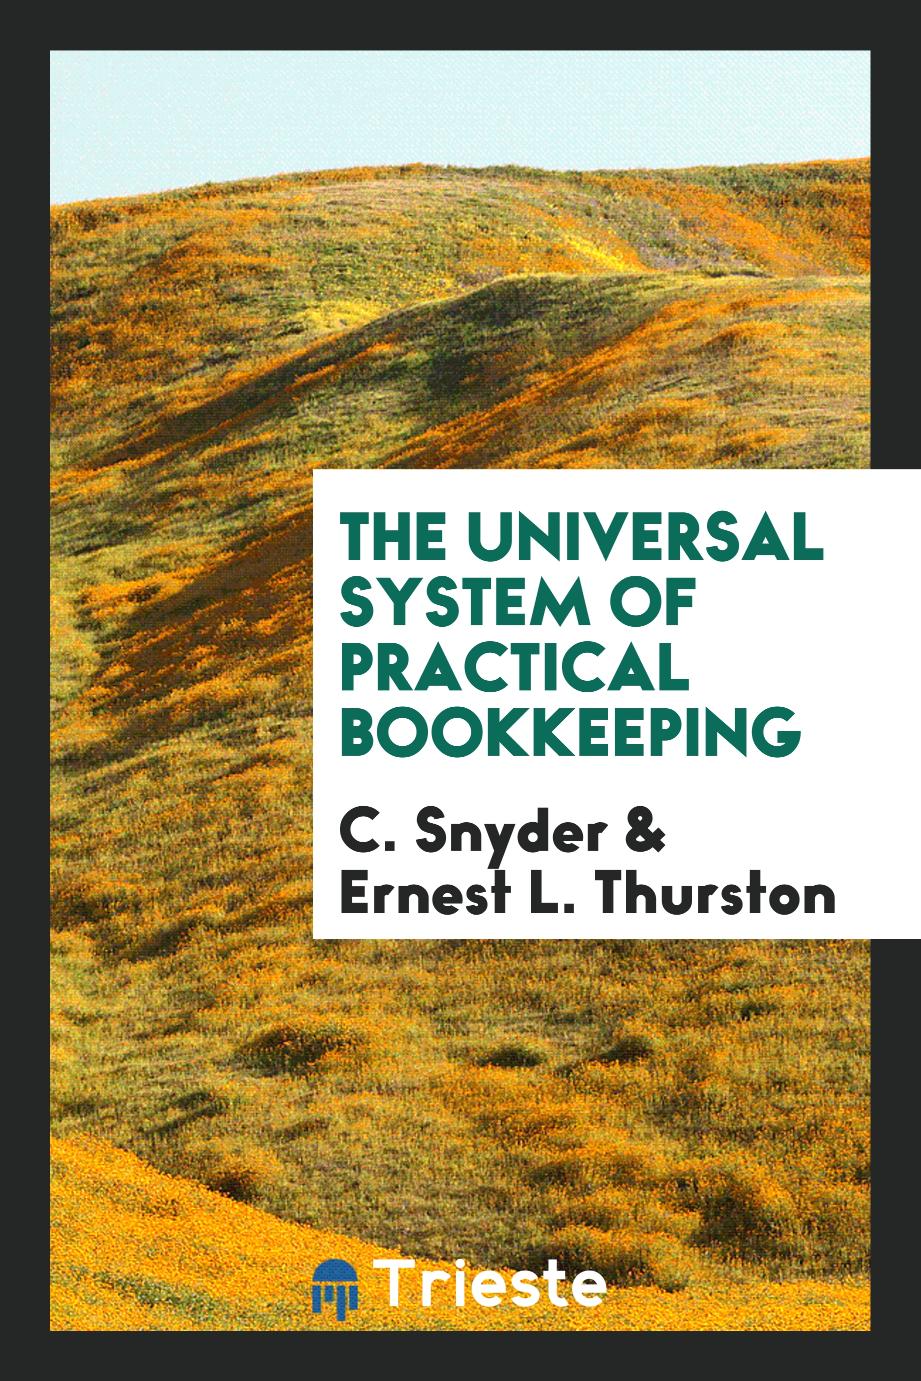 The Universal system of practical bookkeeping